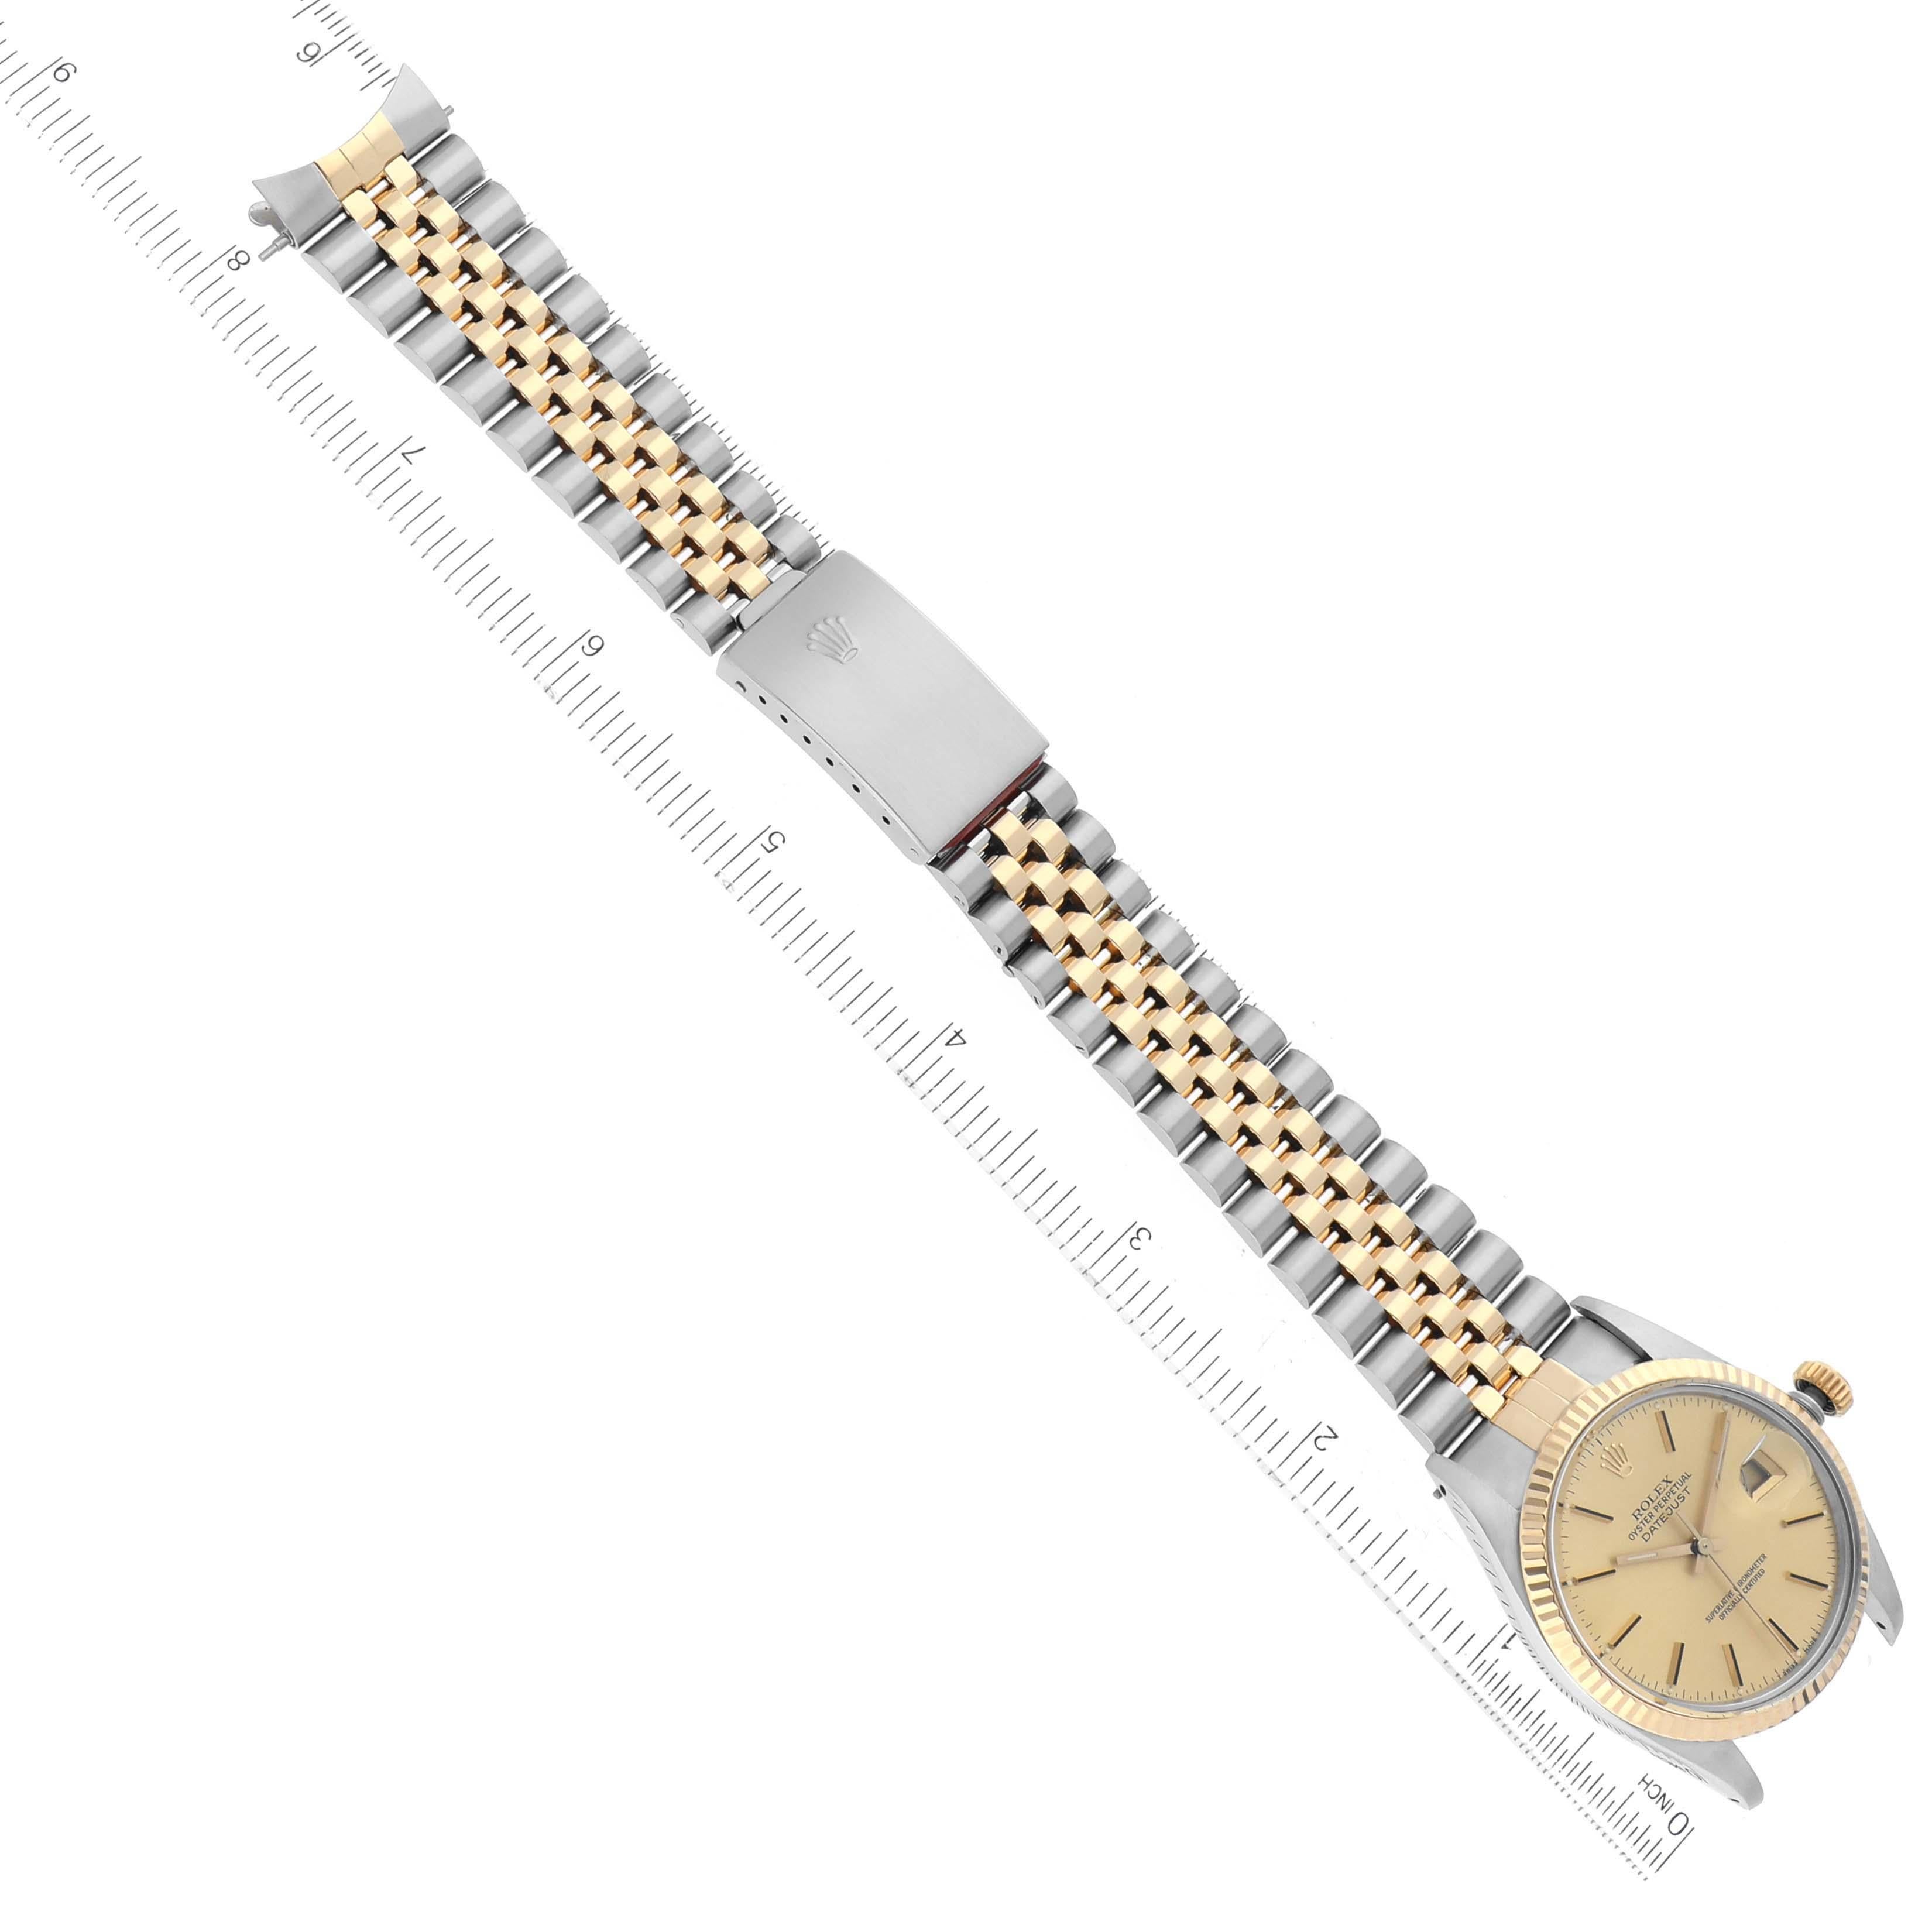 Rolex Datejust Steel Yellow Gold Vintage Mens Watch 16013 Box Papers 8